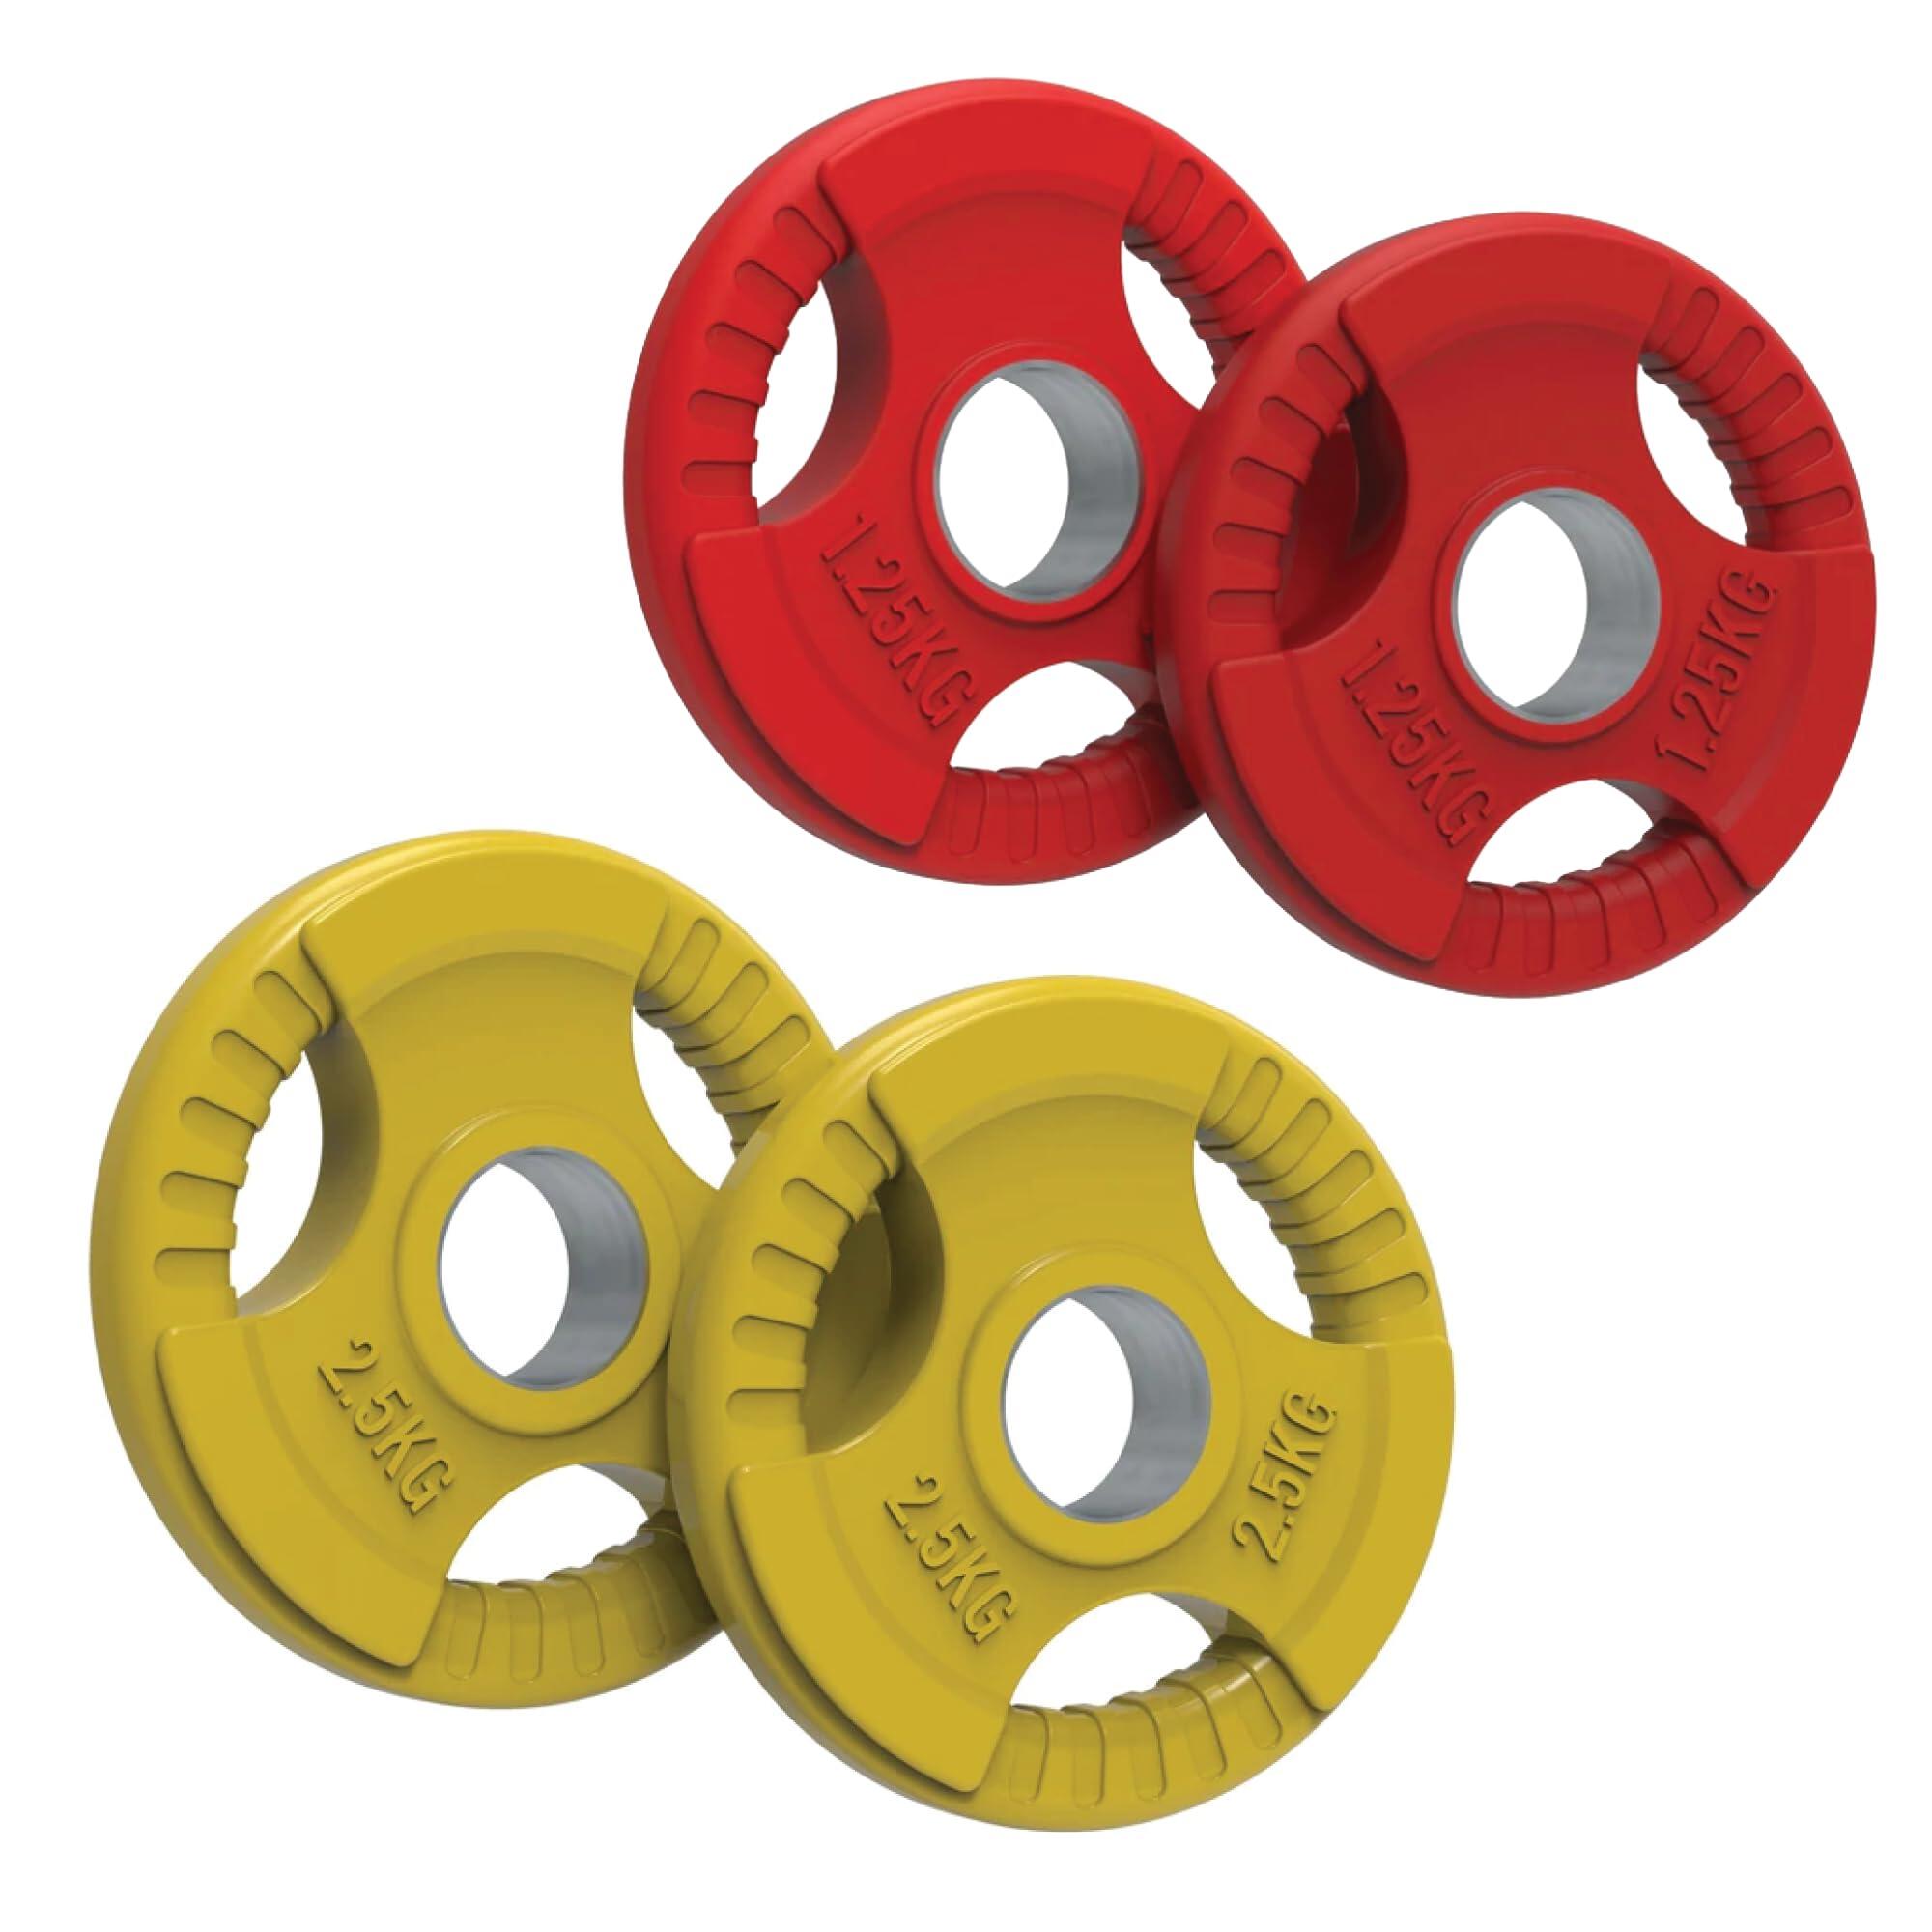 BODY REVOLUTION Olympic Tri-Grip Rubber Weight Plates - Colour SET (2x 1.25kg+2x 2.5kg)